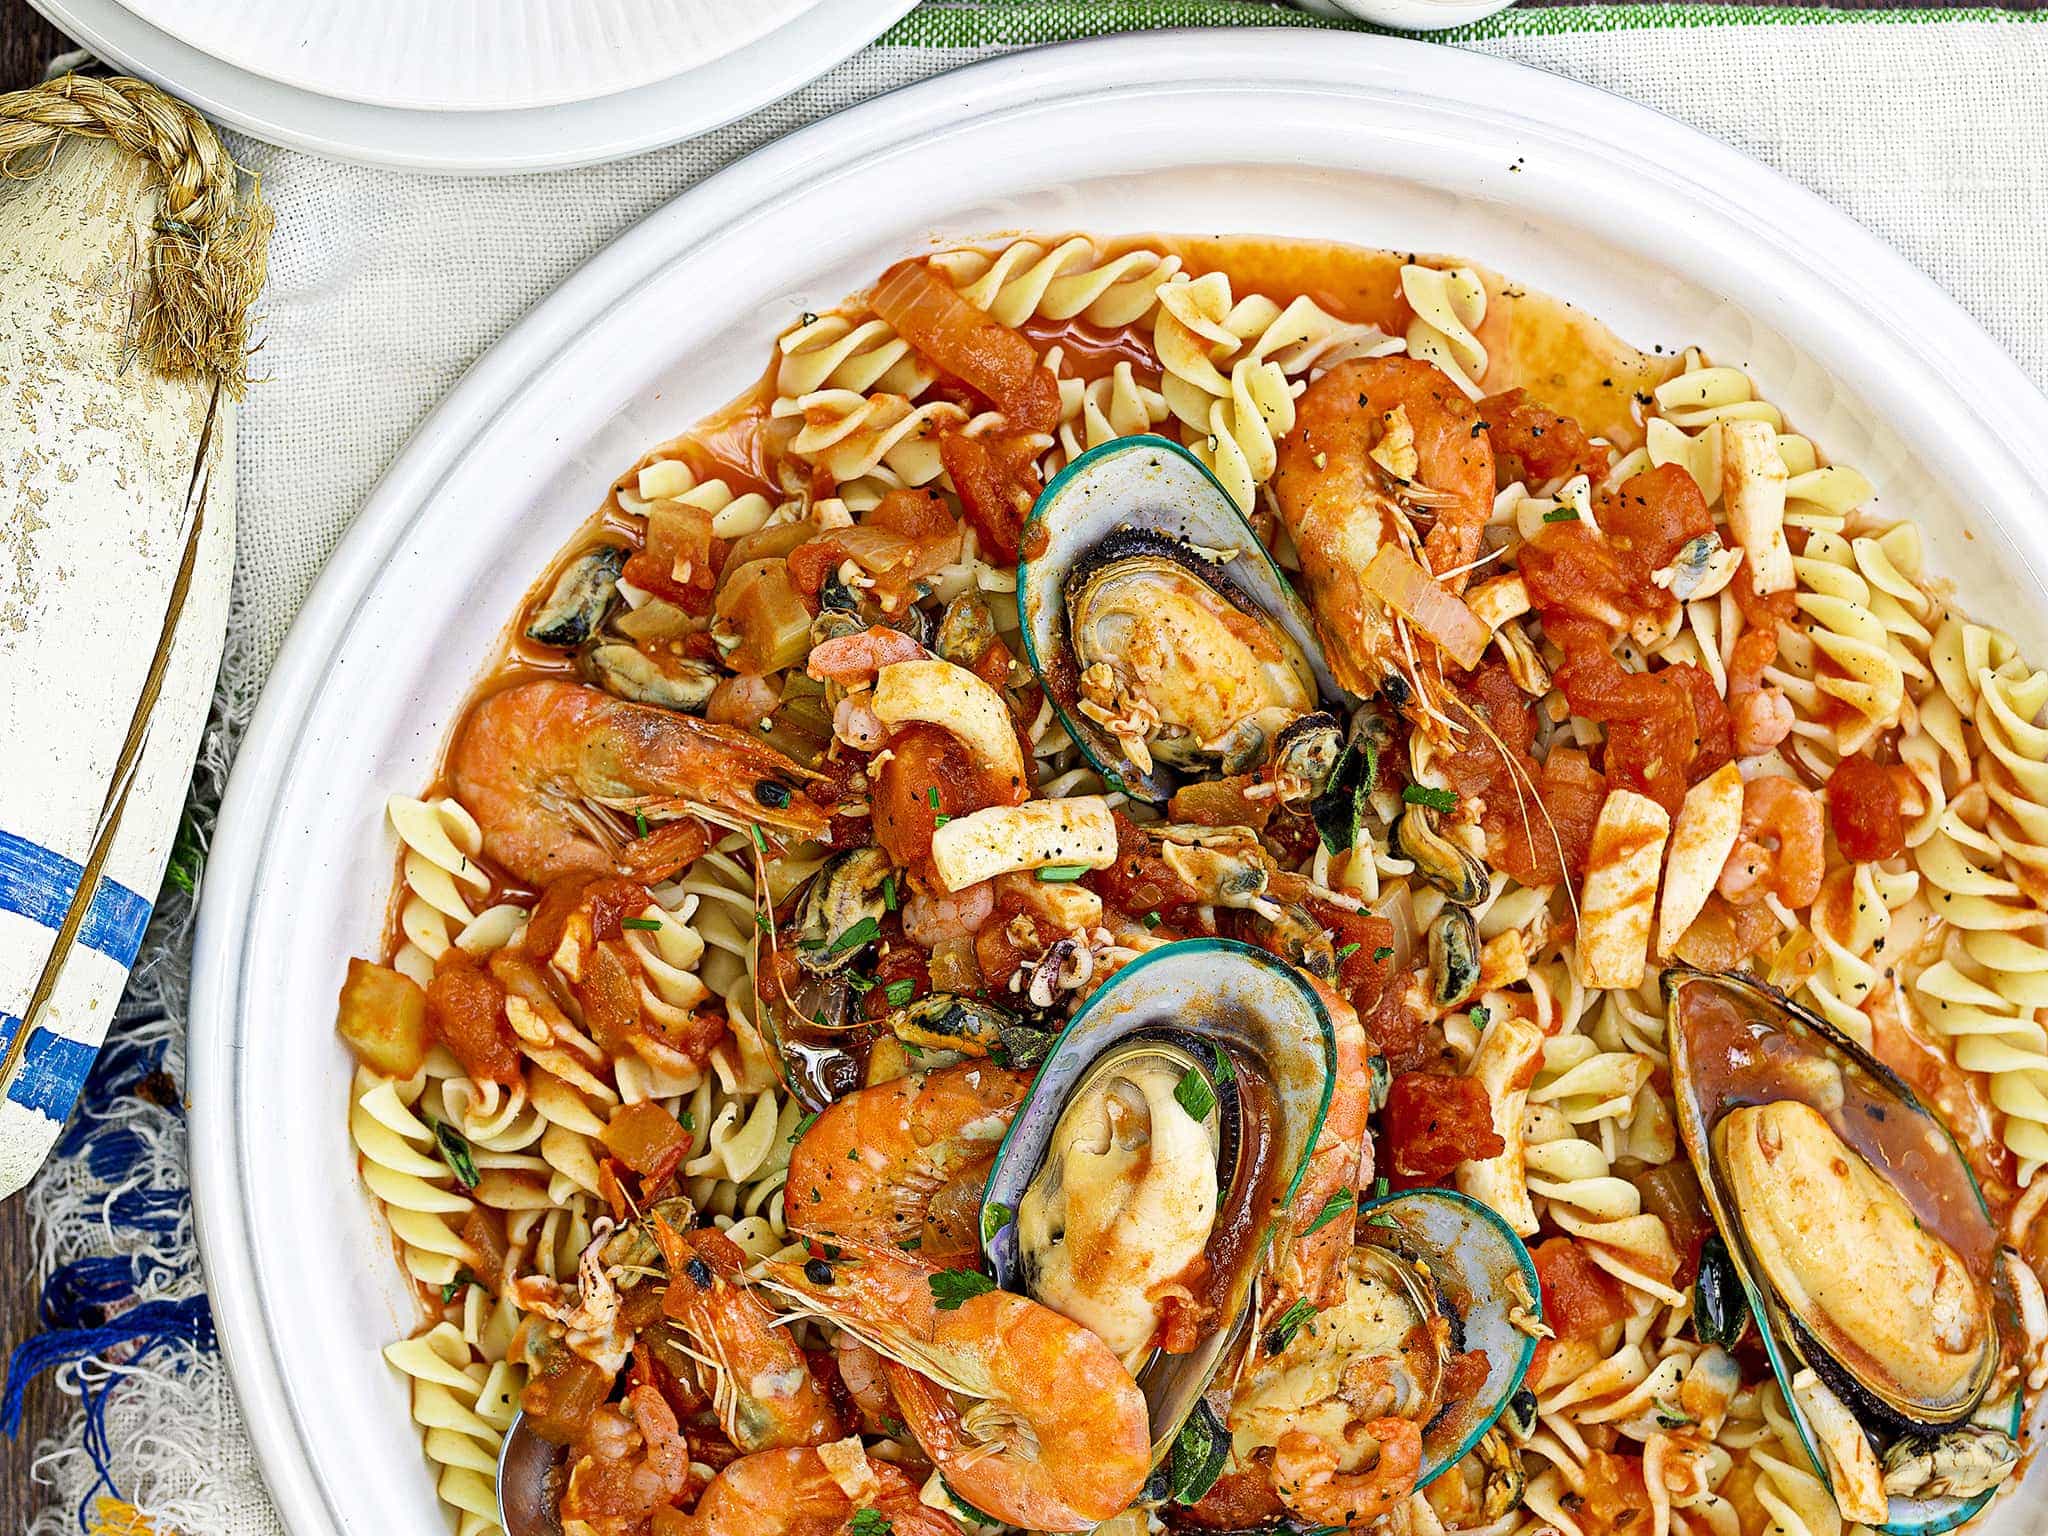 There are many things to love about this spaghetti marinara recipe.